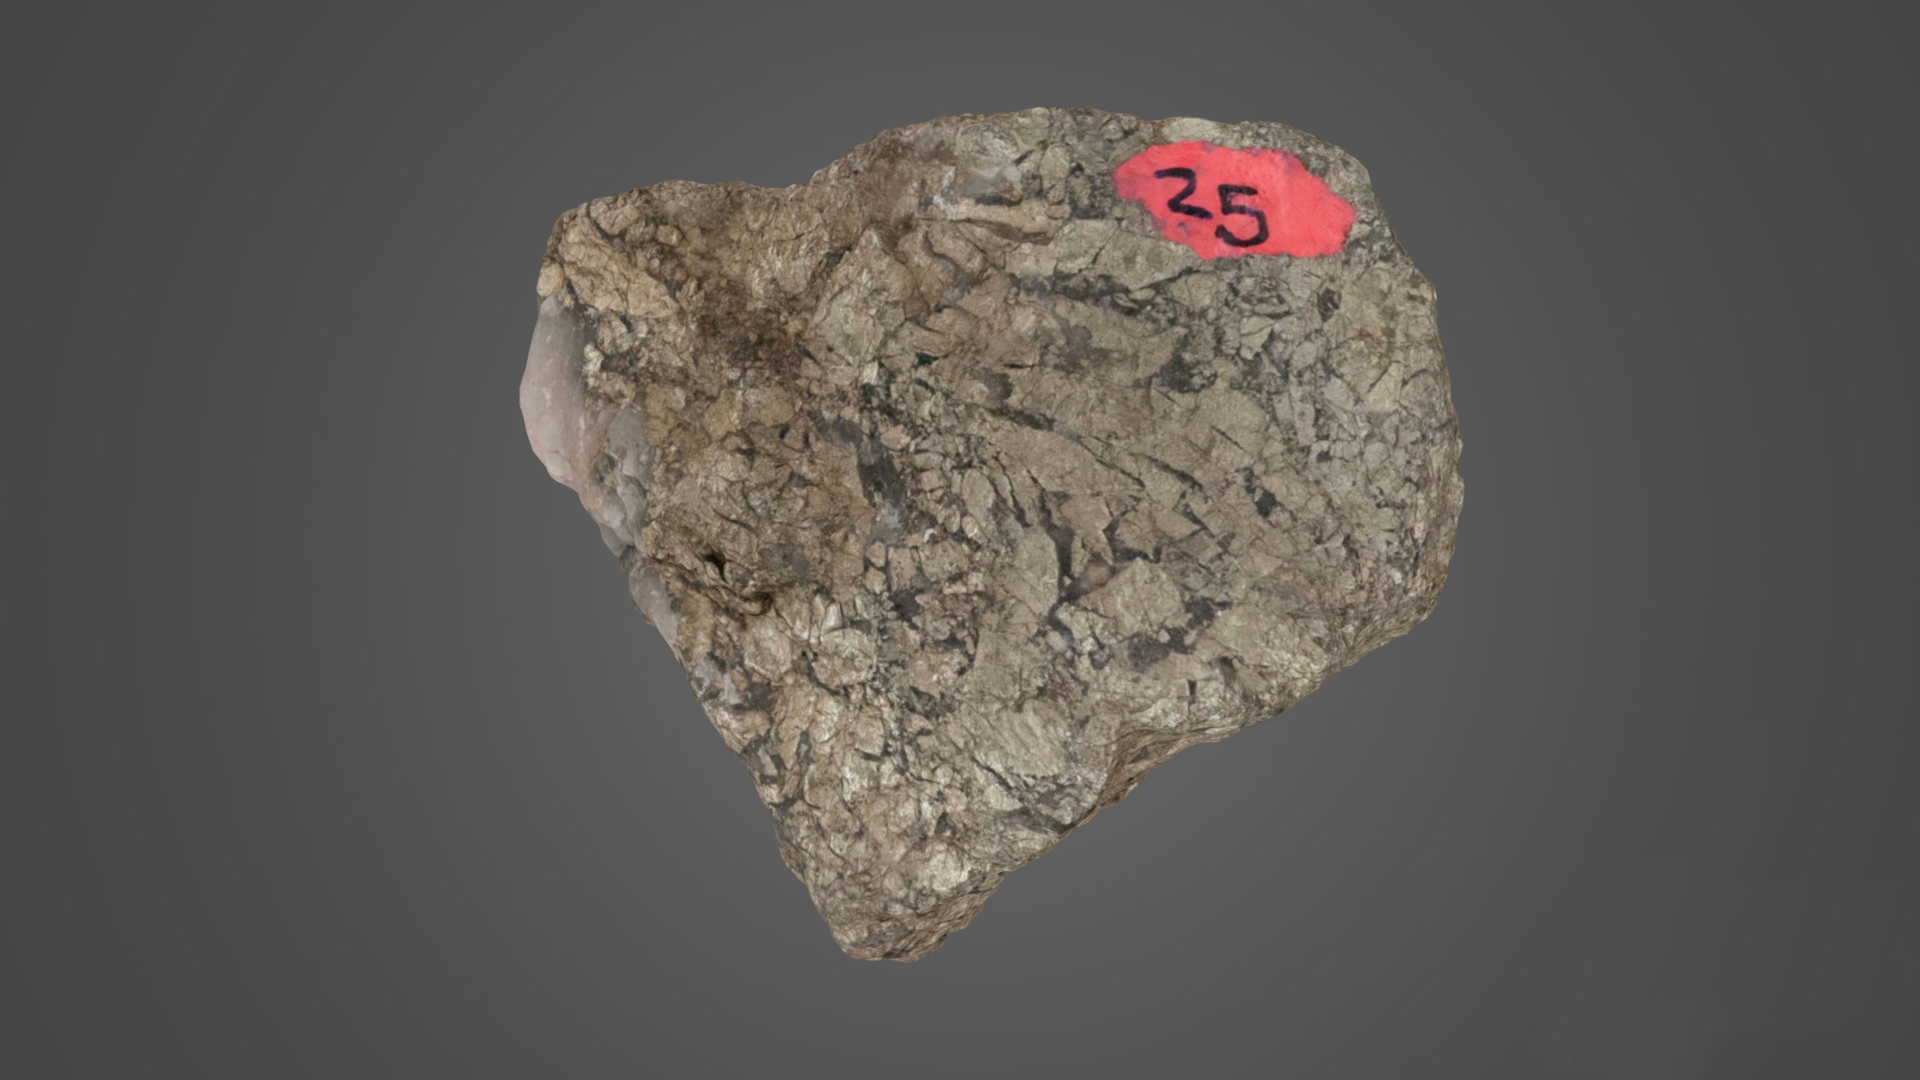 3D Scan of Pyrite (Fool's Gold) Sample